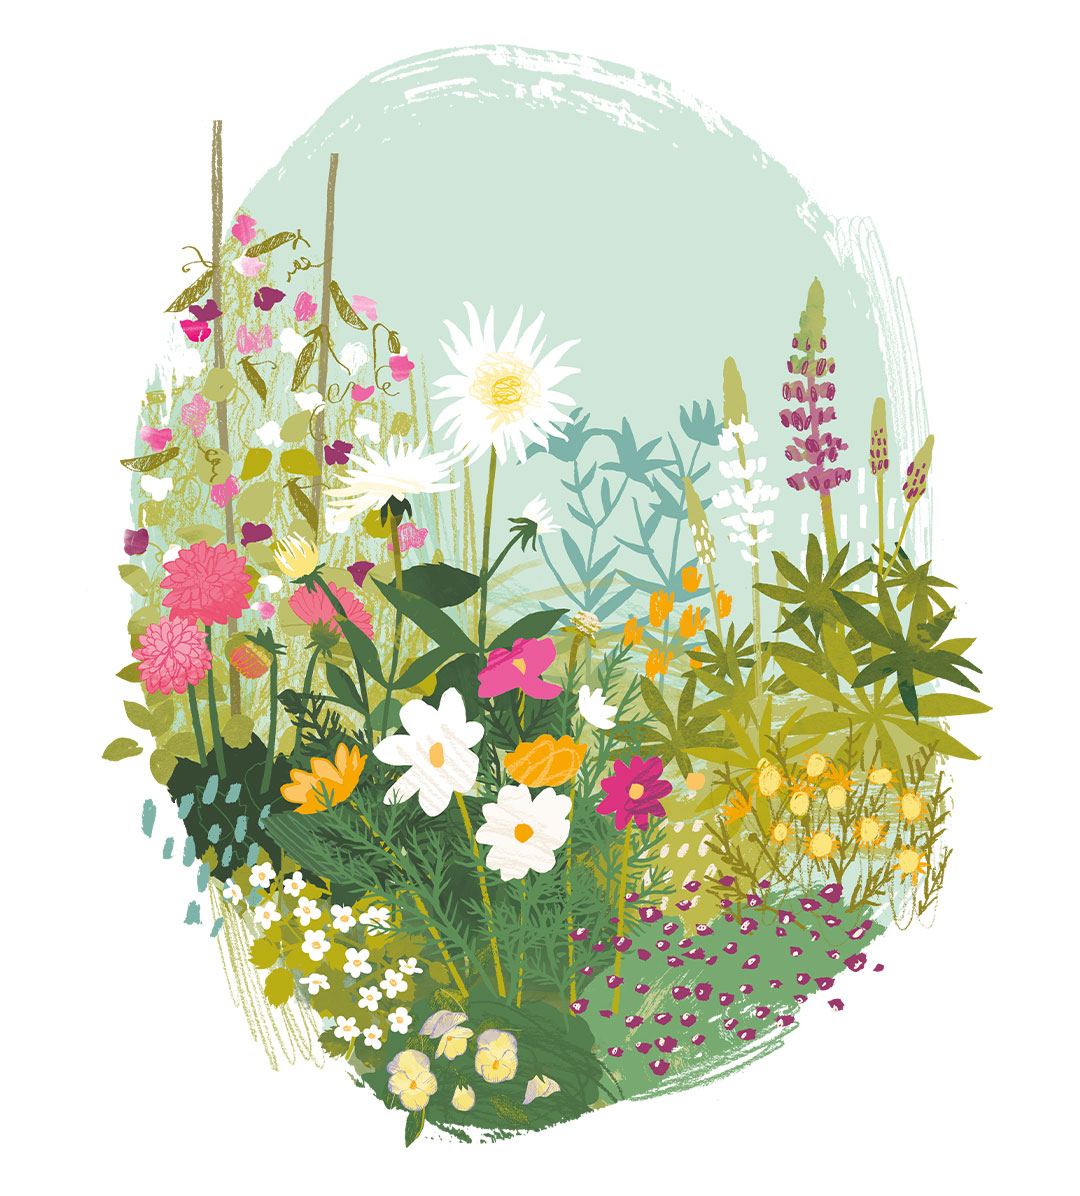 an illustration of a cottage garden by Rebecca Wright